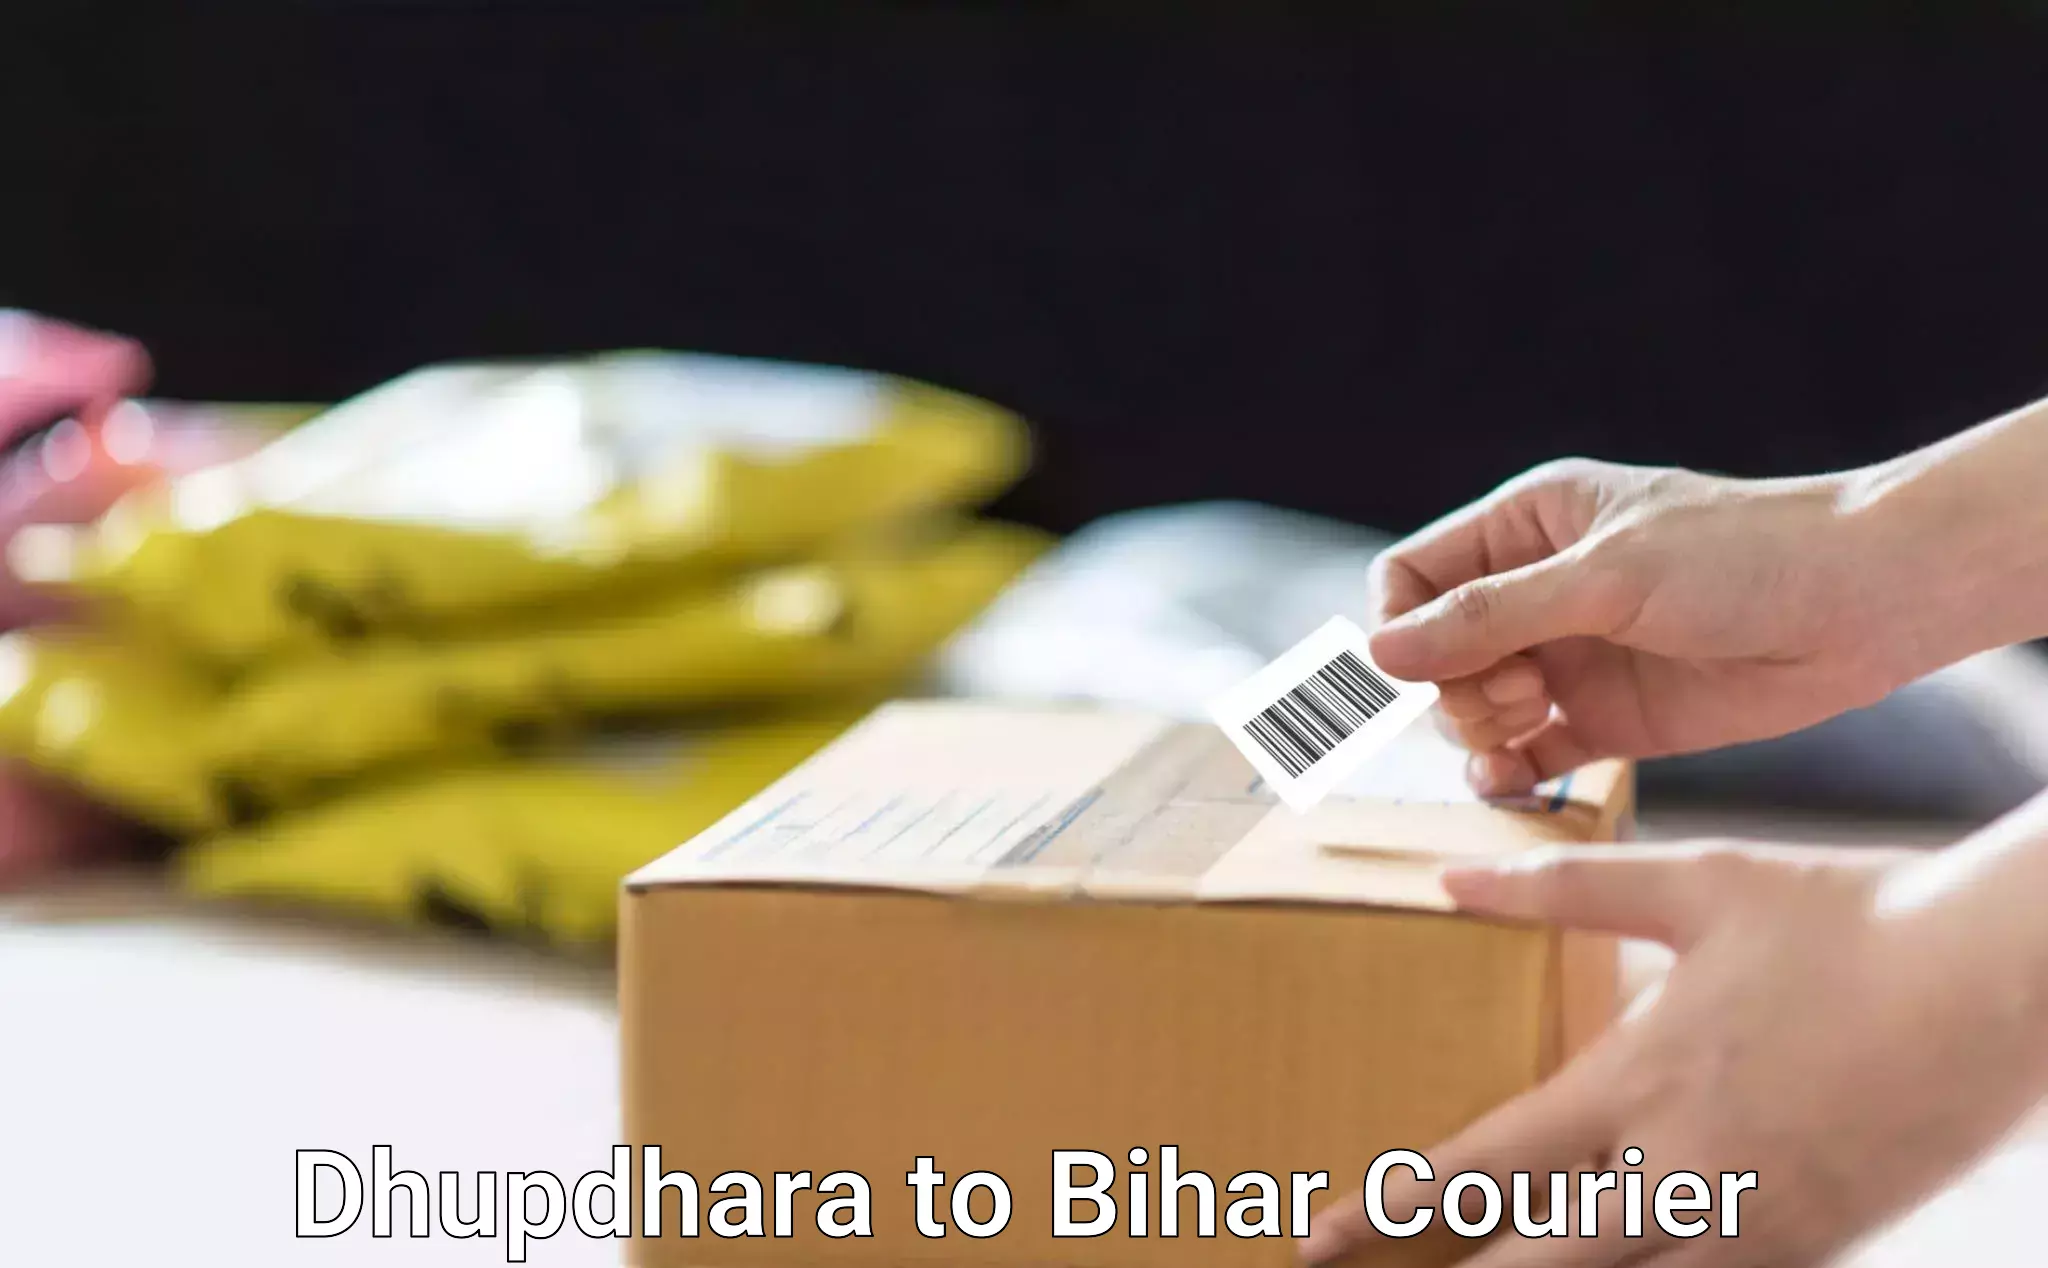 Parcel delivery in Dhupdhara to Bihar